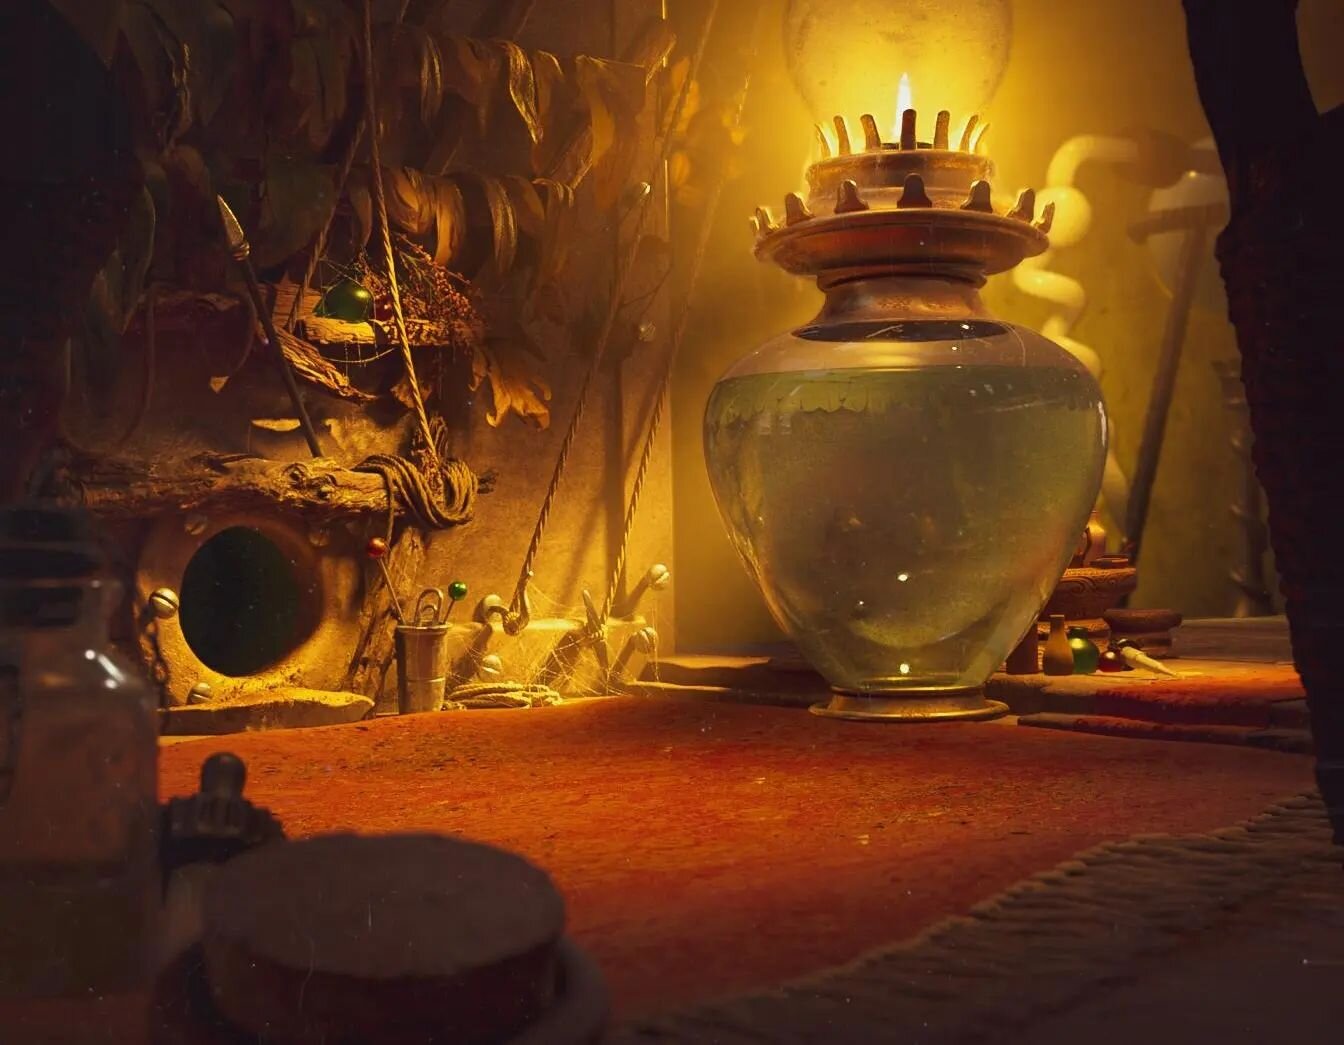 The Secret of NIMH: Mr Ages Apothecary

A 3d environment/lighting study of Mr Ages Apothecary/home from Don Bluth's animated classic The Secret of Nimh (1982) 💡🐀
.
.
.
#fanart #stilllife #3dmodeling
#3danimation #3dsmax #arnold #quixelmegascans #me